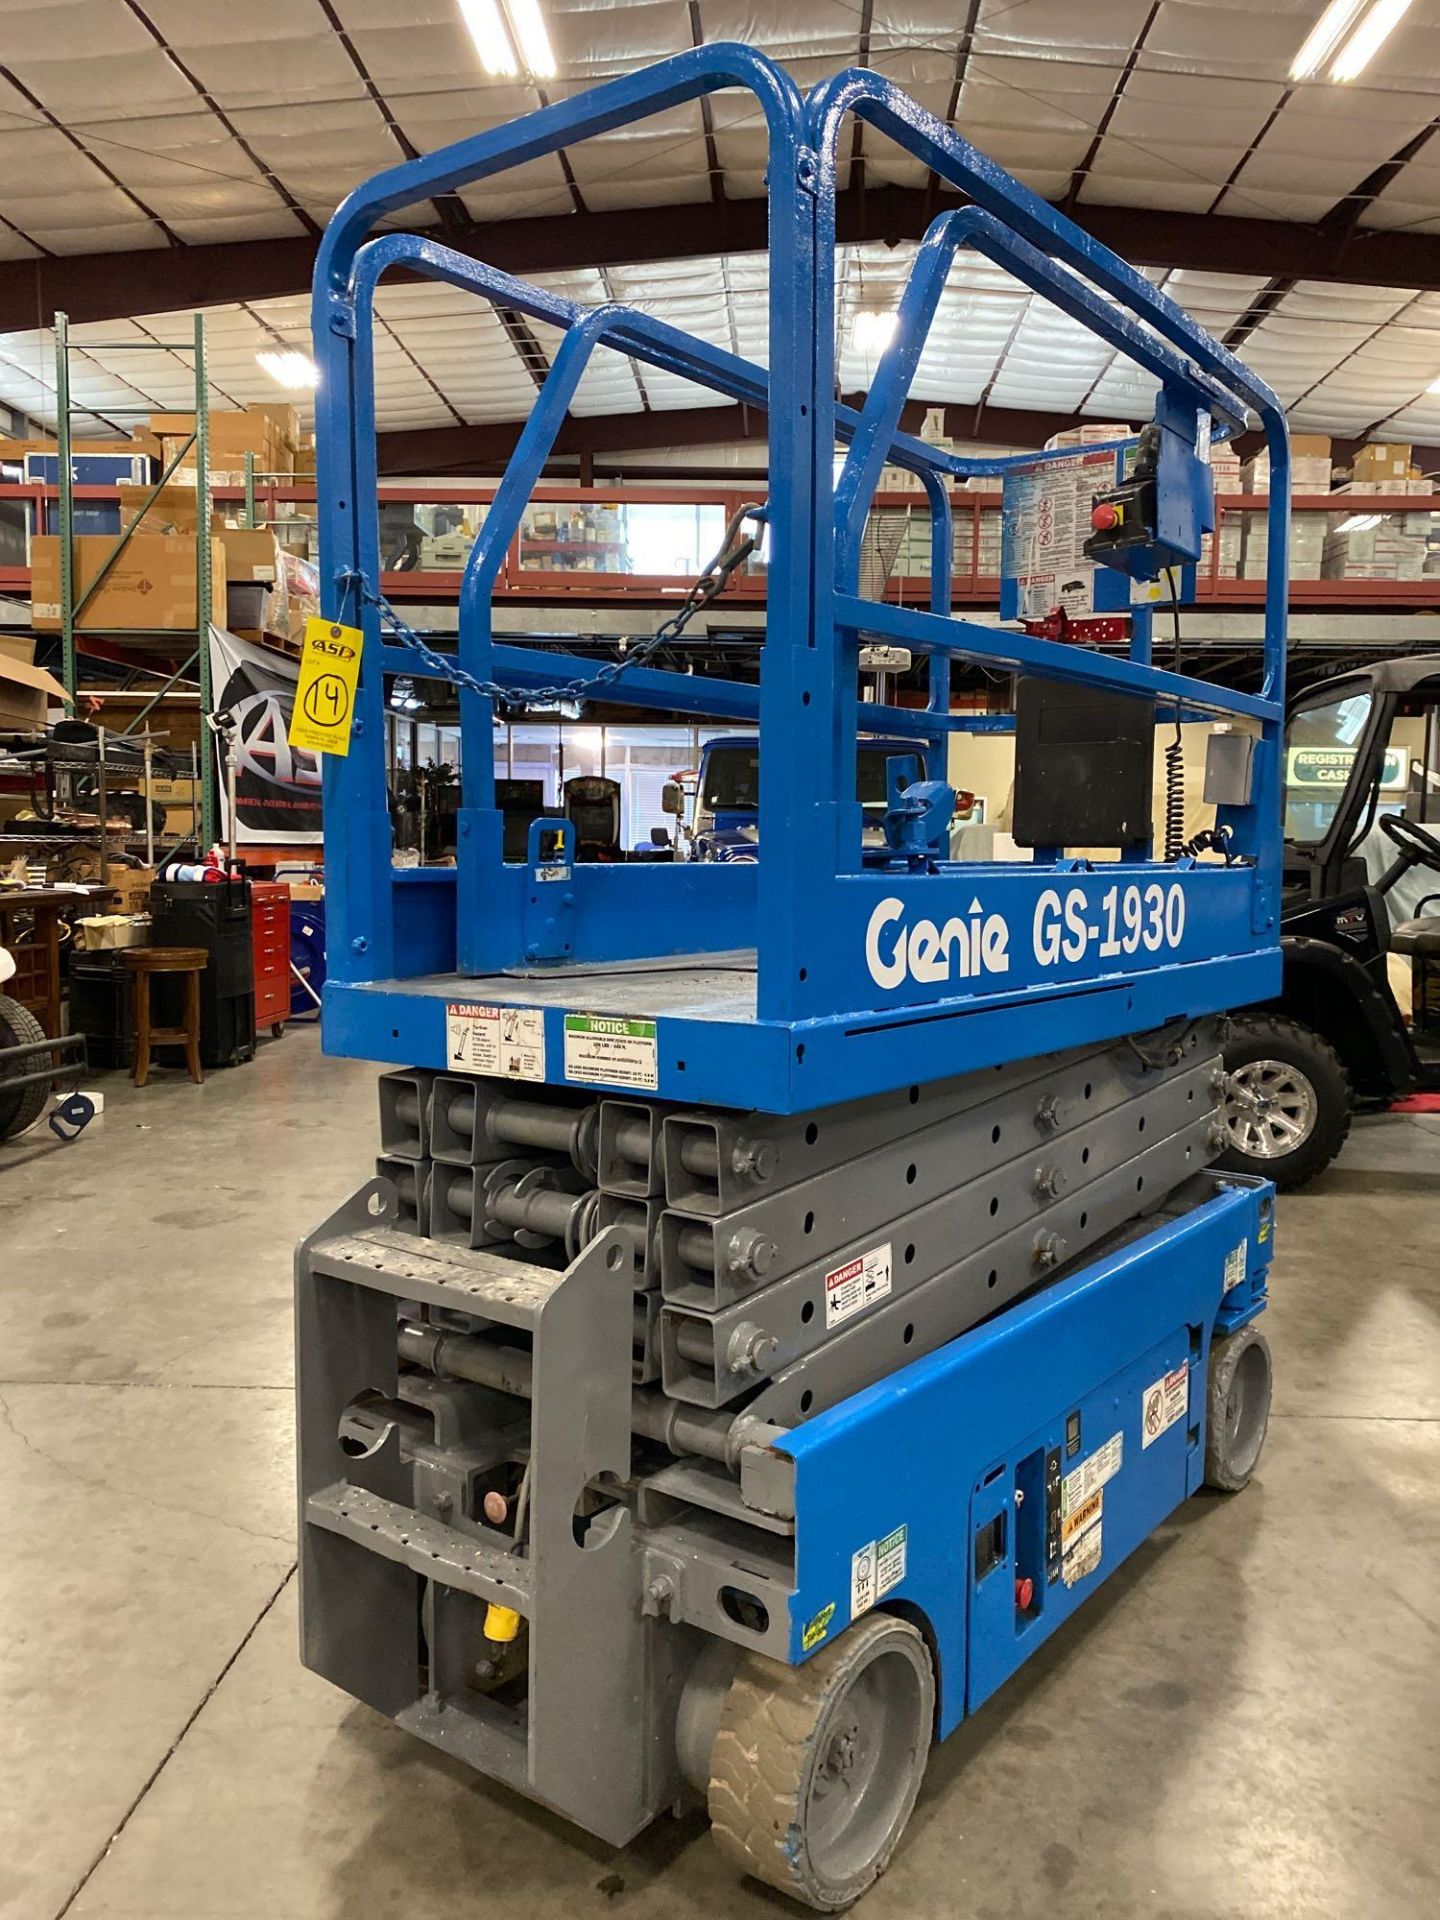 GENIE GS1930 SCISSOR LIFT, SELF PROPELLED, 19' PLATFORM HEIGHT, BUILT IN BATTERY CHARGER, SLIDE OUT - Image 3 of 12